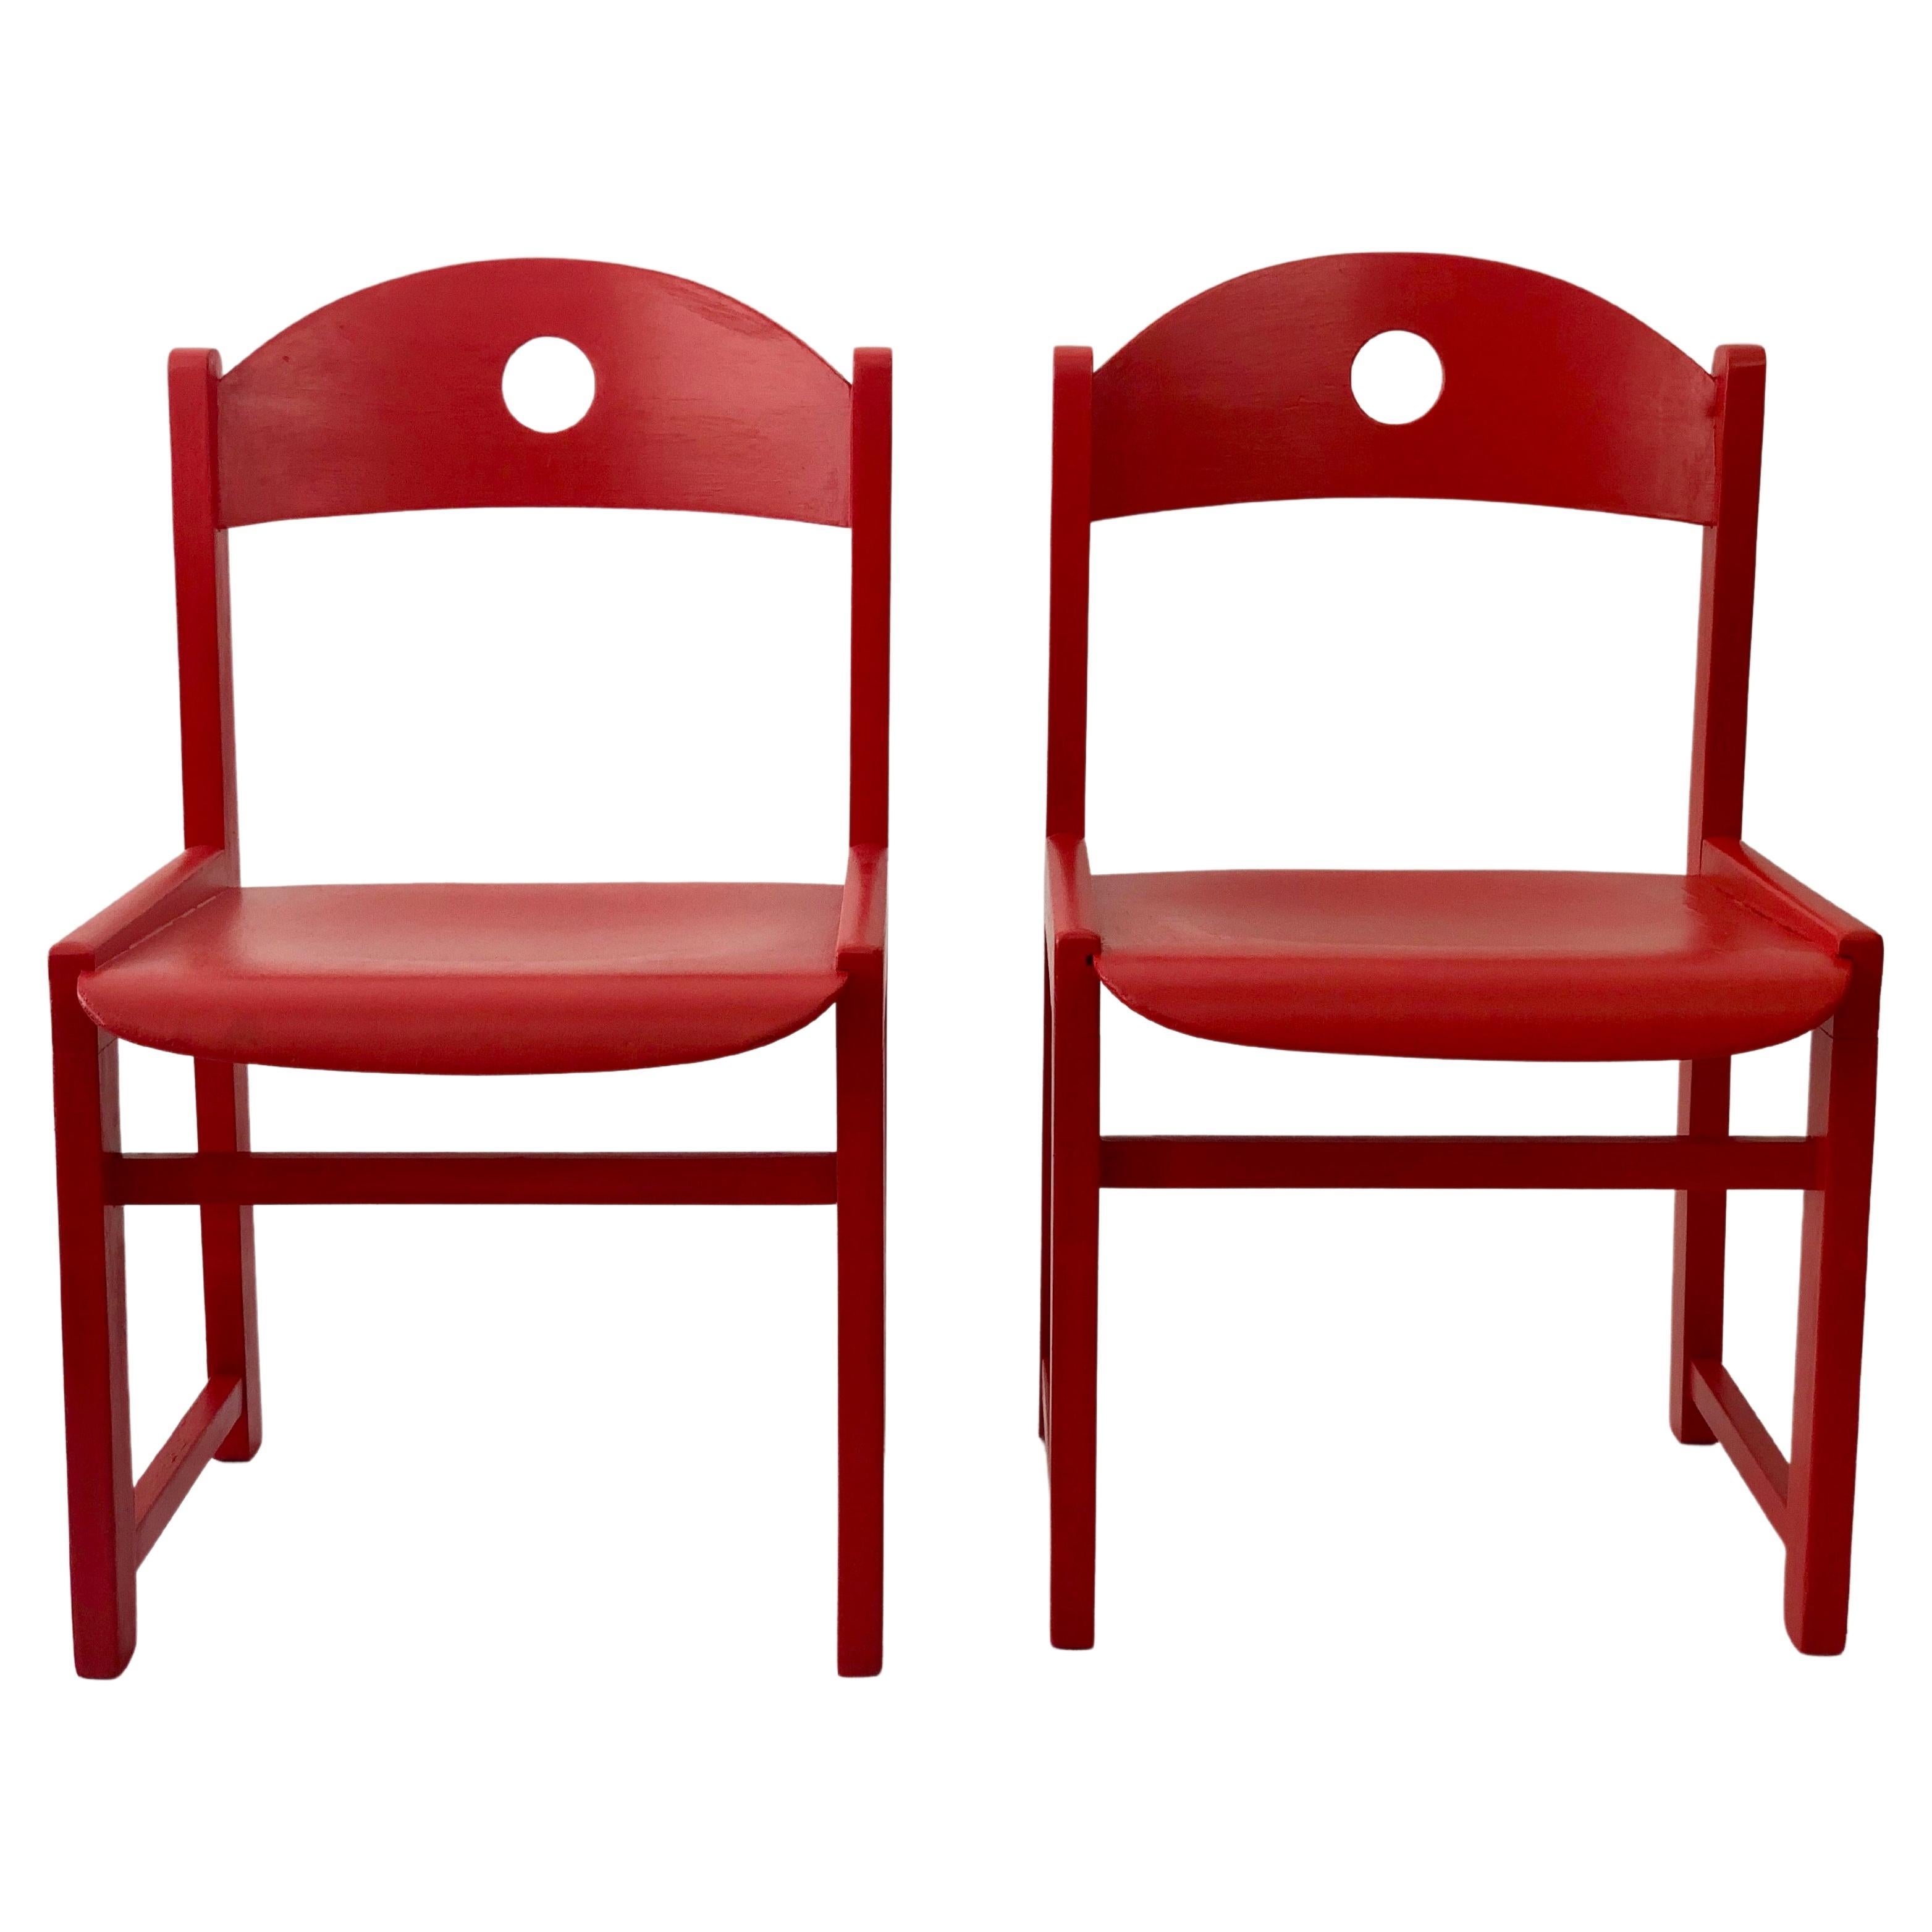 Pair of Red Painted Children Chairs from the 1970 's